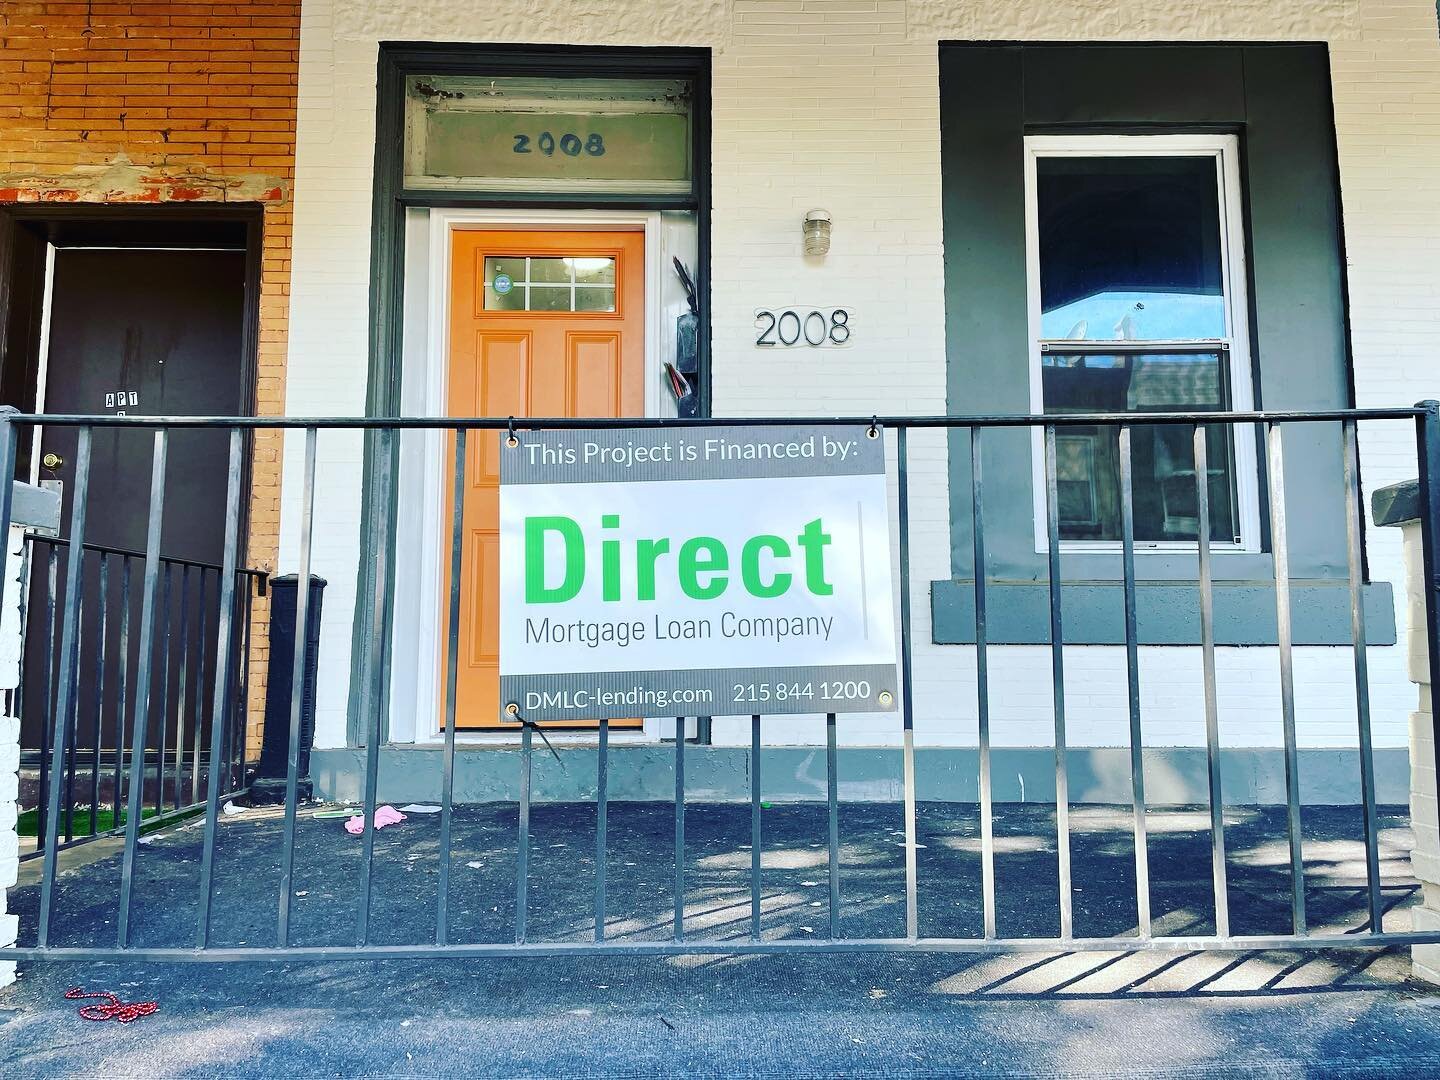 DMLC has, quite literally, been around the block a few times since its founding in 1956. We've funded thousands of development projects and investment properties in and around Philadelphia -- more than 1,000 loans in the last five years alone. Throug